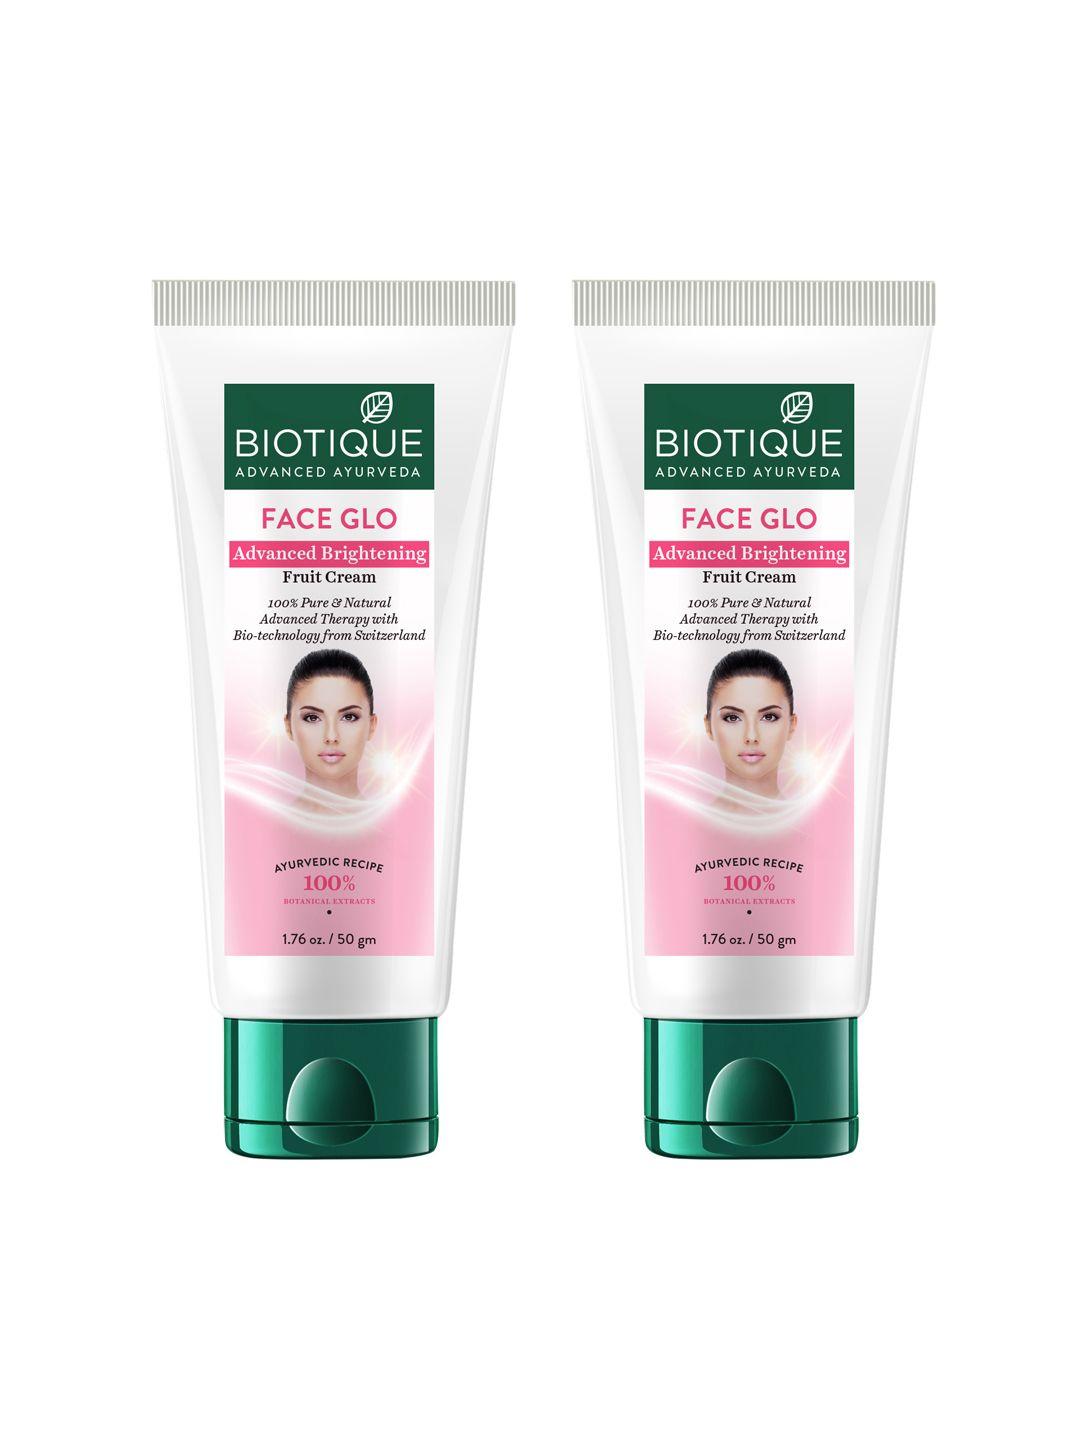 biotique set of 2 pure & natural face glo advanced brightening fruit face cream - 50g each